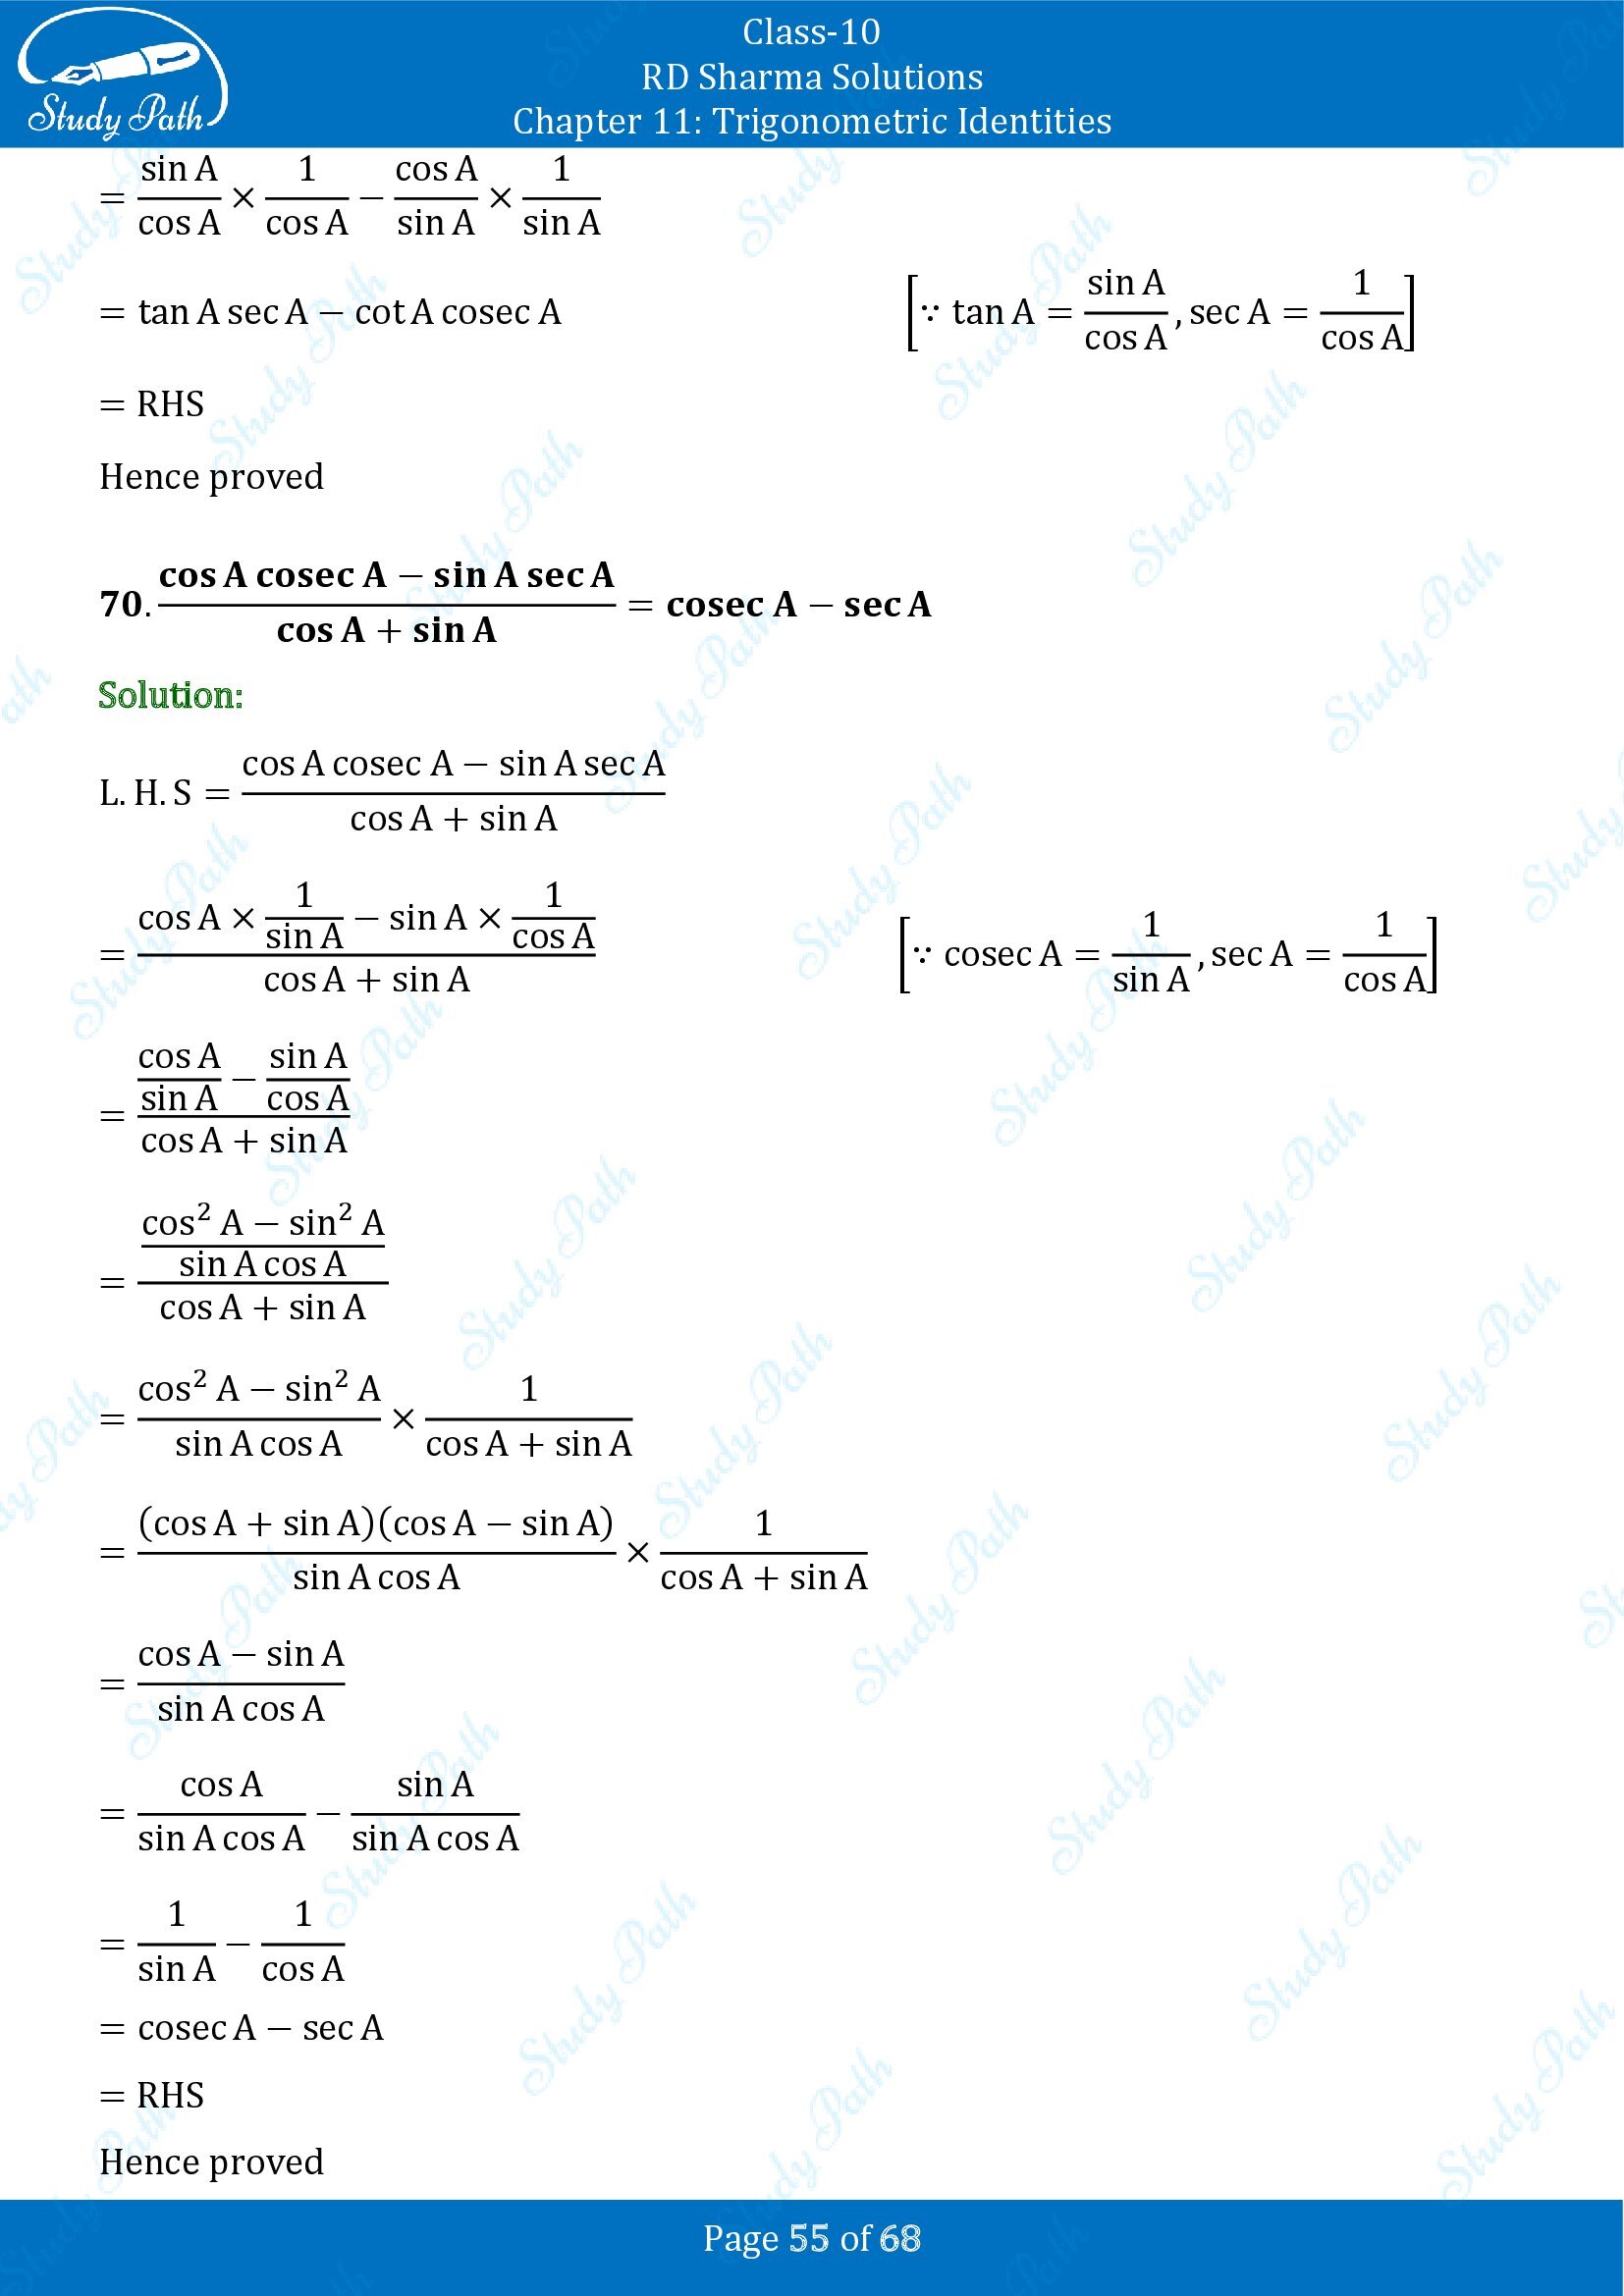 RD Sharma Solutions Class 10 Chapter 11 Trigonometric Identities Exercise 11.1 00055